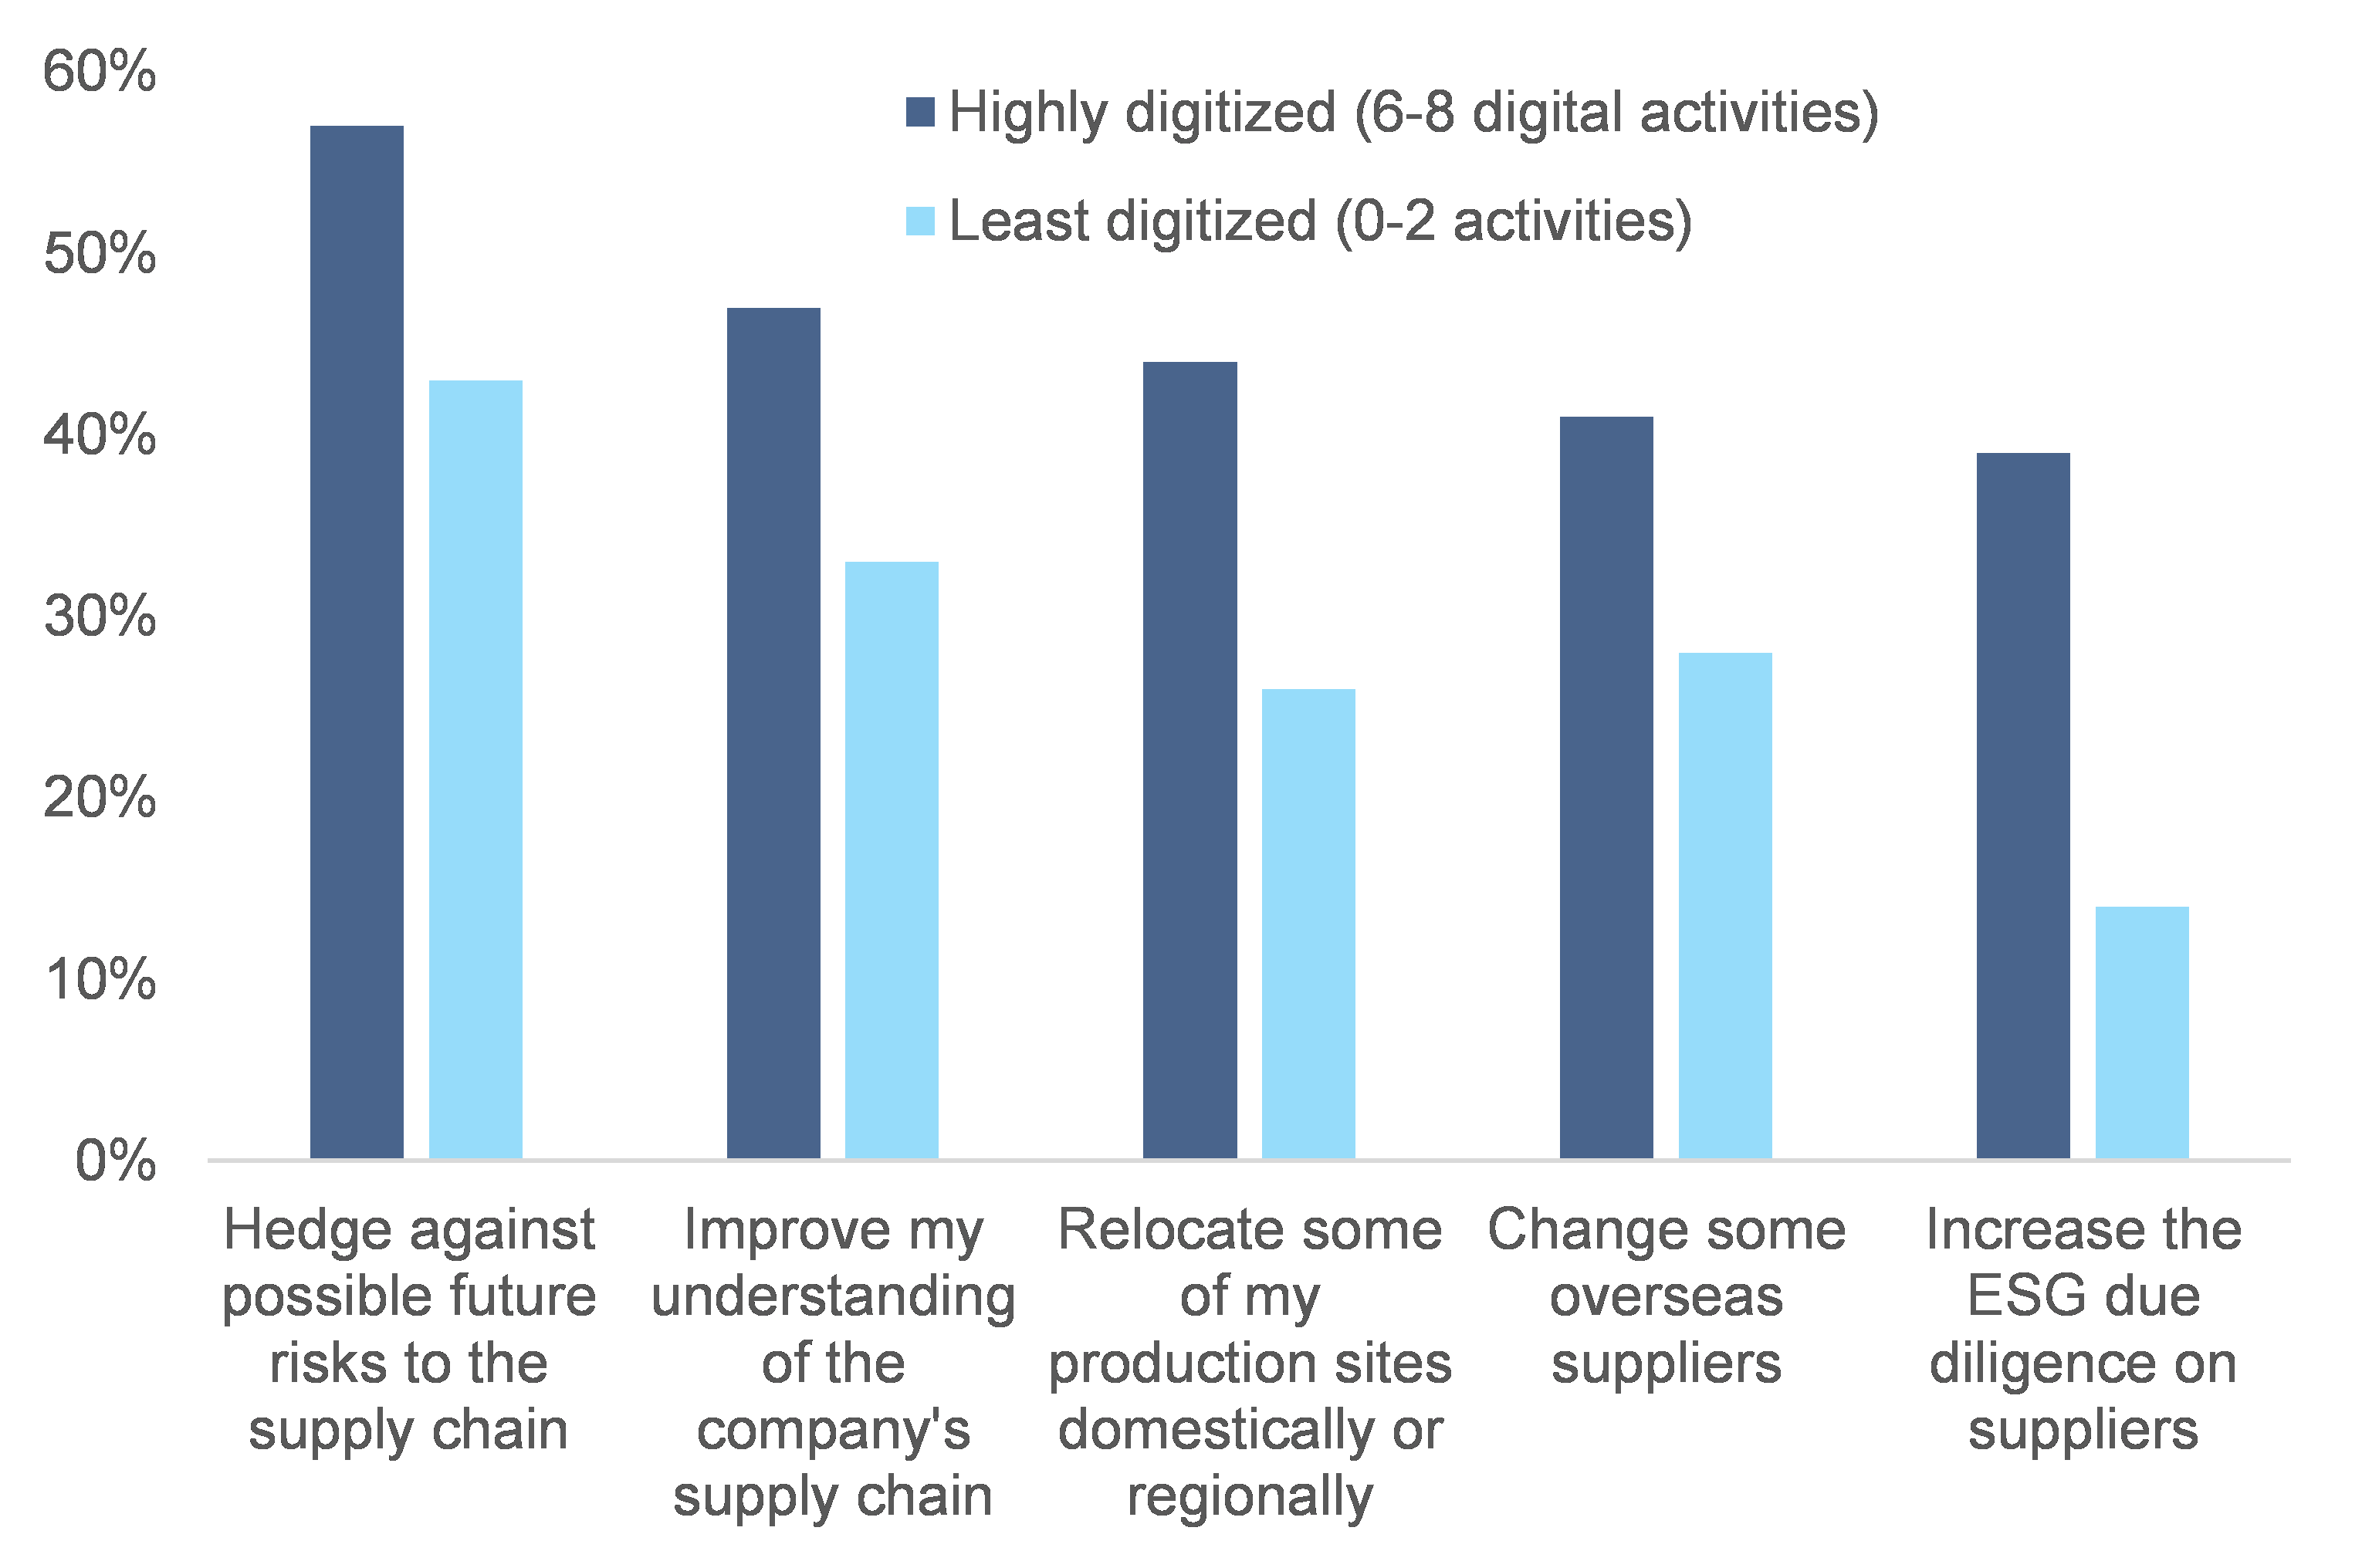 Figure 4: Coping mechanisms, by level of digitization